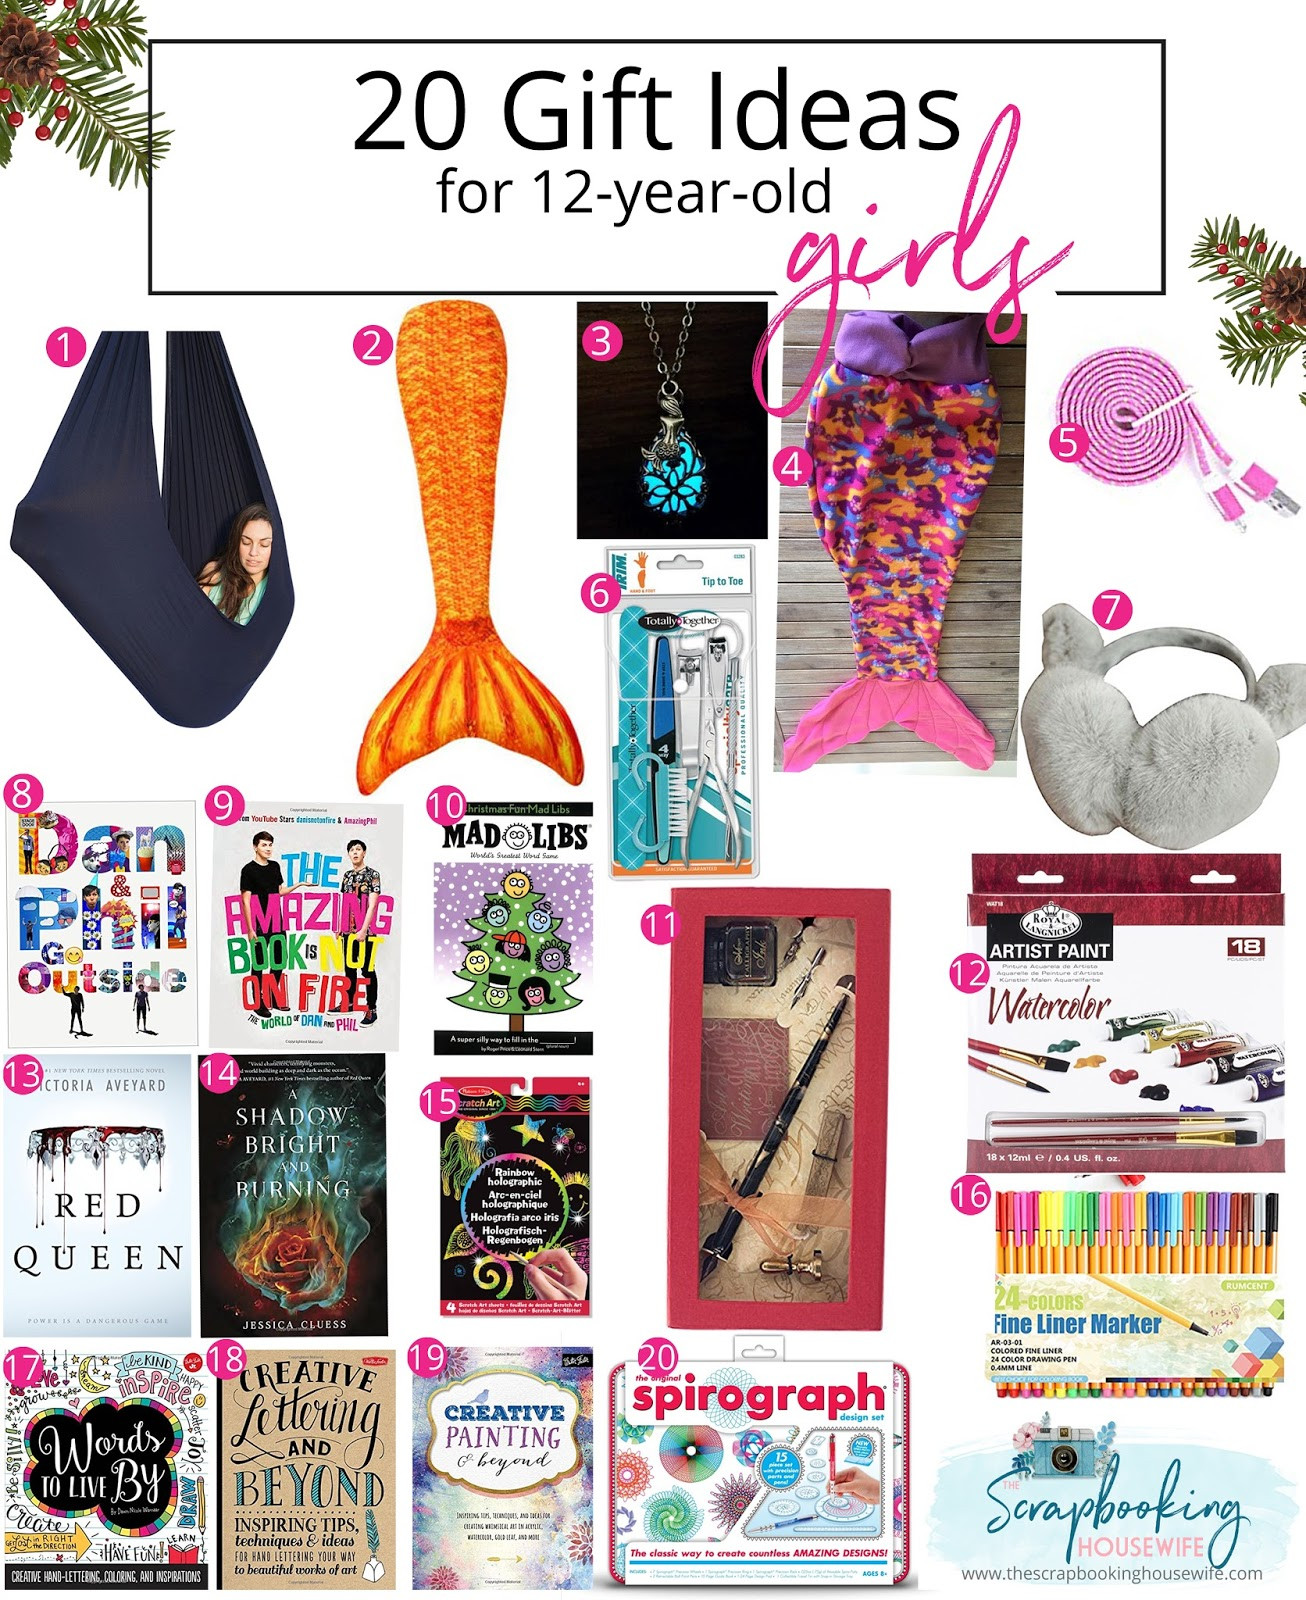 Gift Ideas For Girls 12
 Ellabella Designs 13 GIFT IDEAS FOR TODDLERS